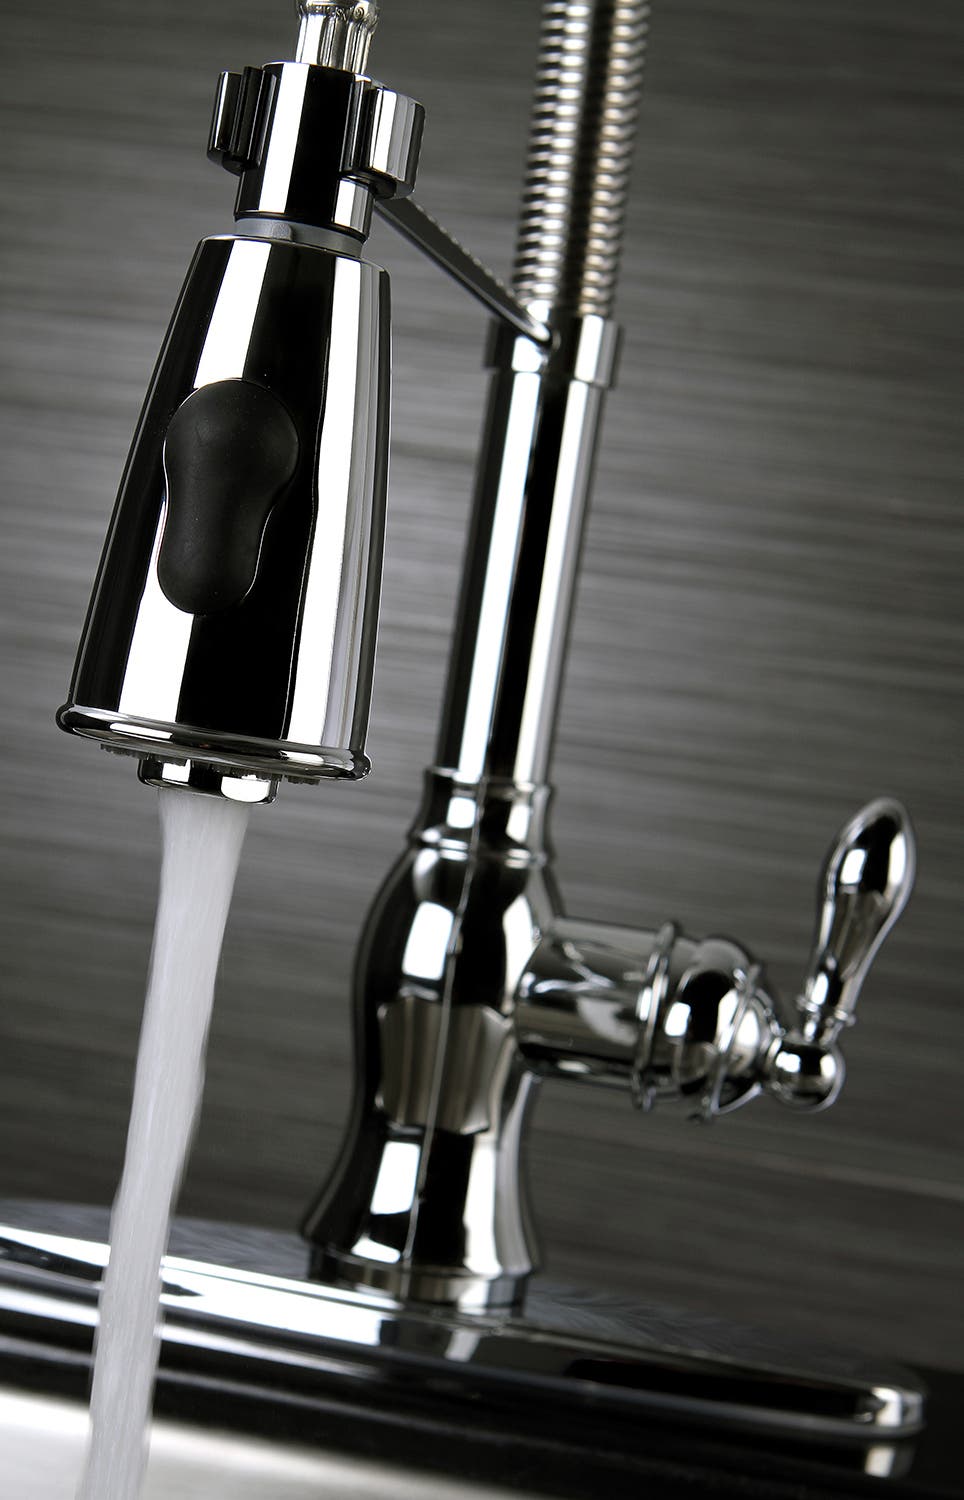 Finish with flair: How to choose your faucet finishes